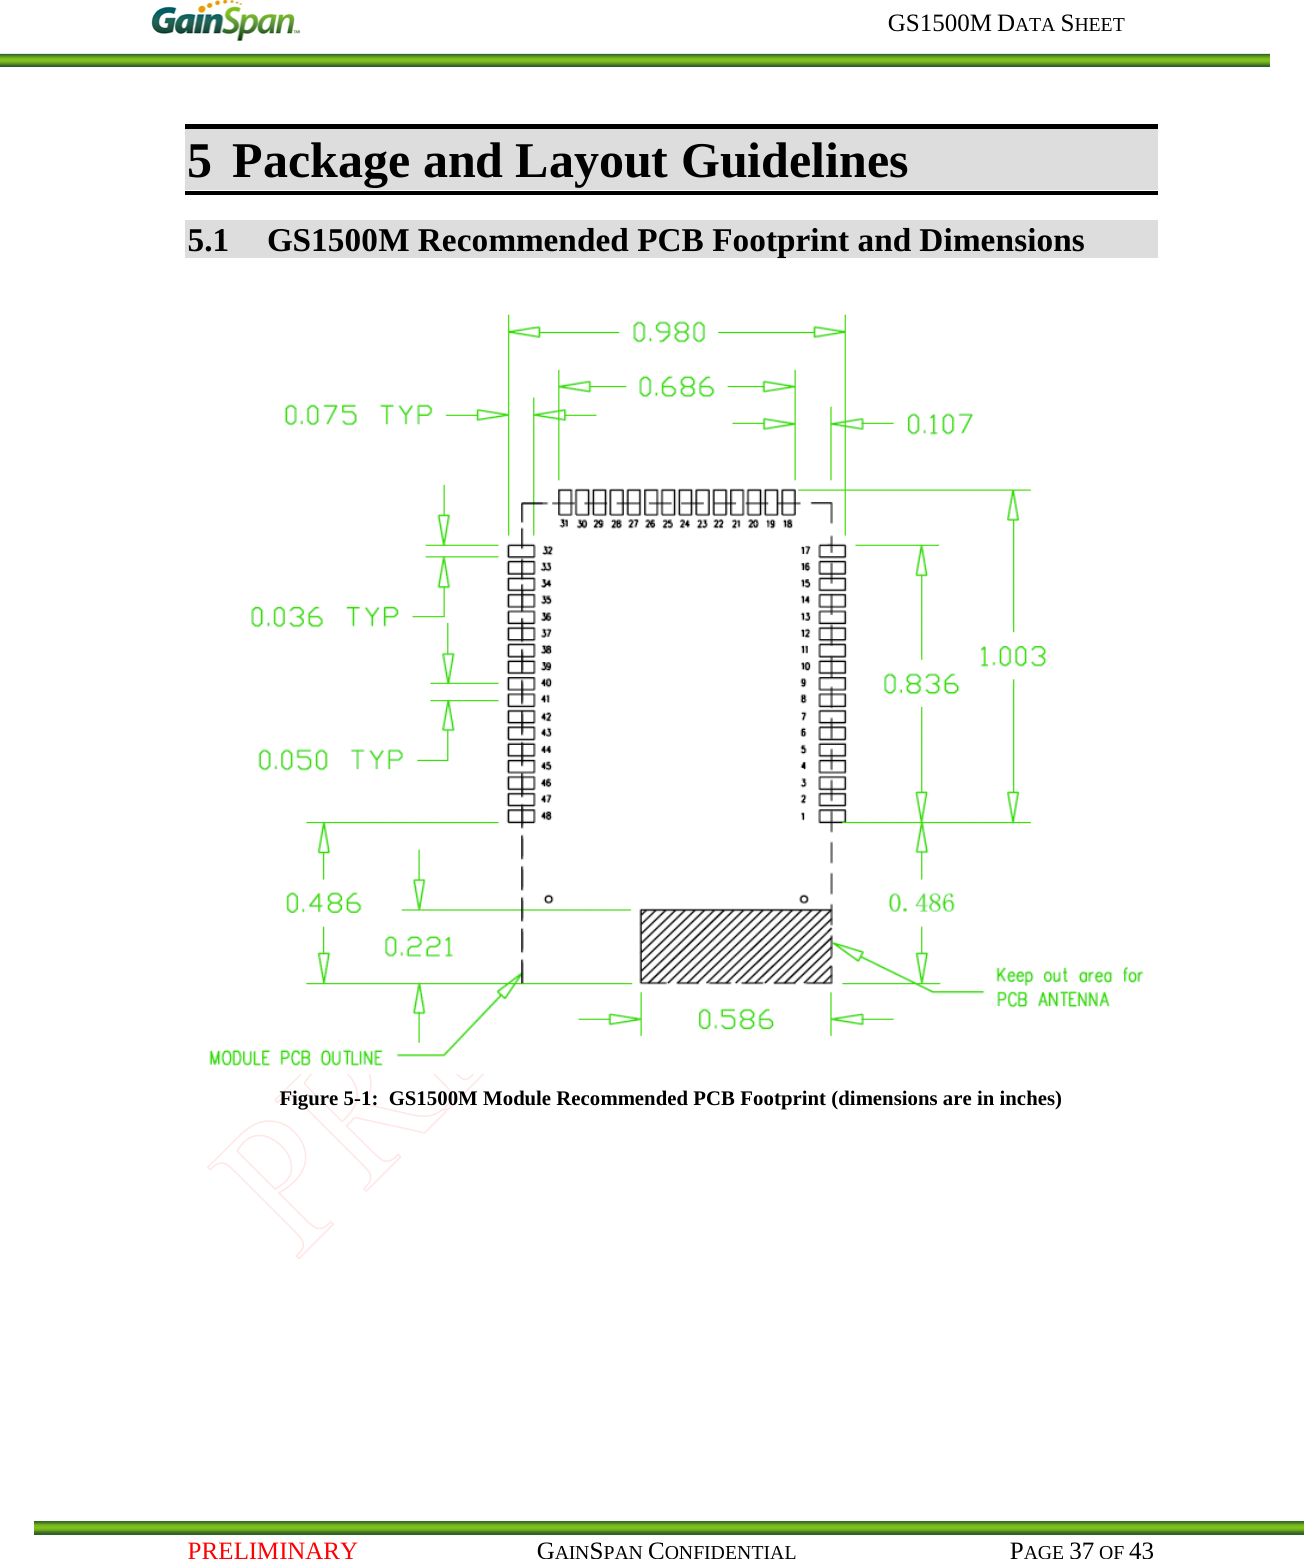     GS1500M DATA SHEET   PRELIMINARY                                    GAINSPAN CONFIDENTIAL                                           PAGE 37 OF 43 5 Package and Layout Guidelines 5.1 GS1500M Recommended PCB Footprint and Dimensions   Figure 5-1:  GS1500M Module Recommended PCB Footprint (dimensions are in inches) 